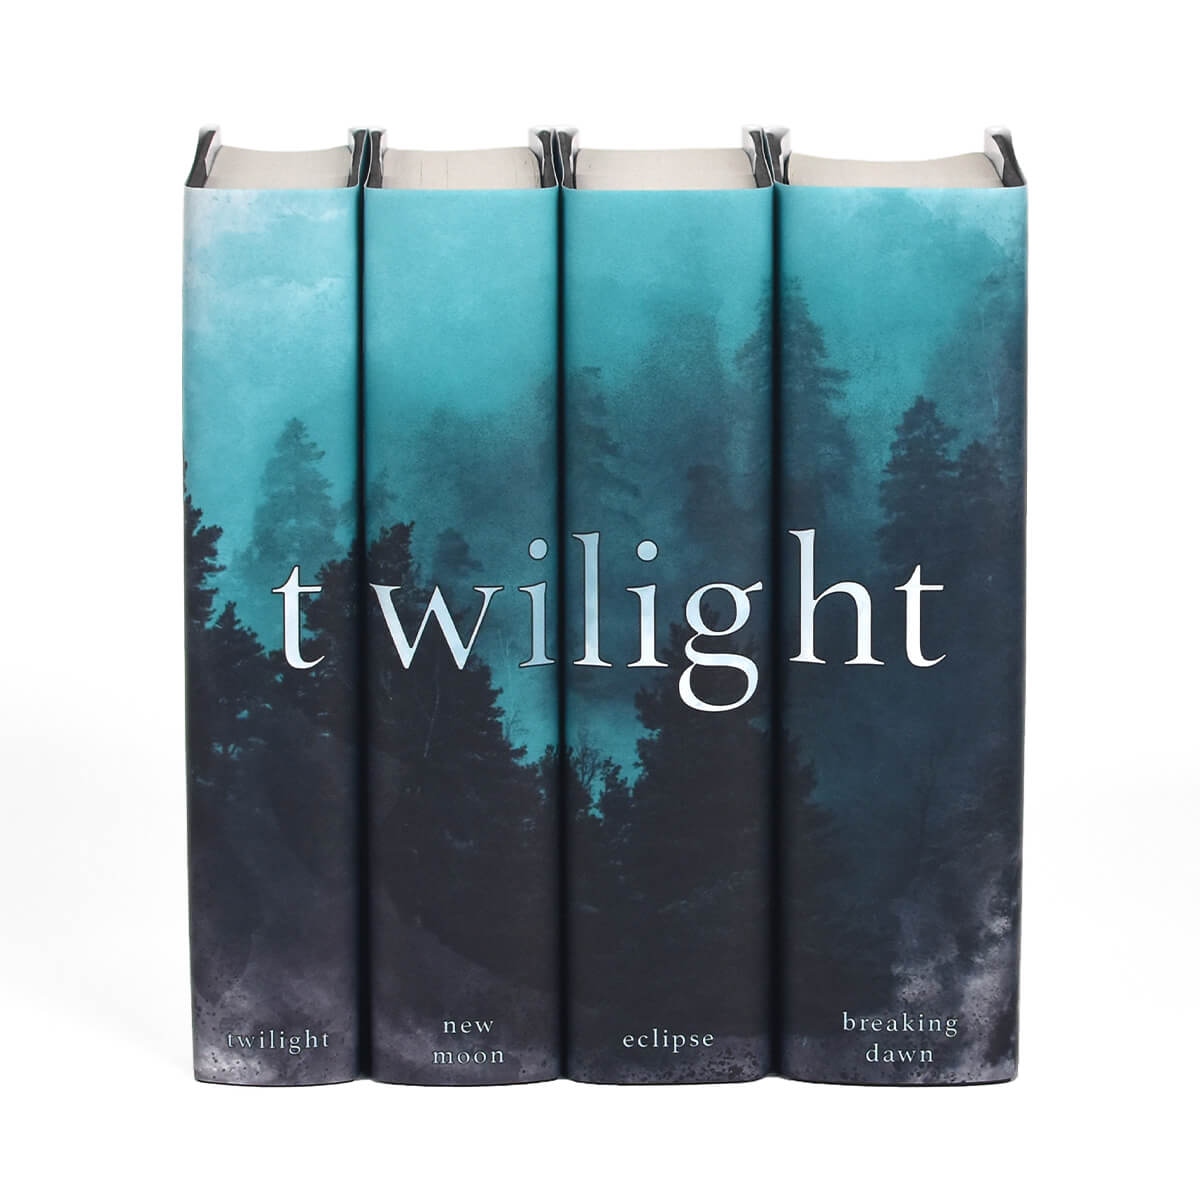 Twilight Saga four book set from Juniper Custom. Twilight typed across spines in white serif font set against a blue and gray watercolor style foggy pine forest. Book title centered at the bottom of each spine.